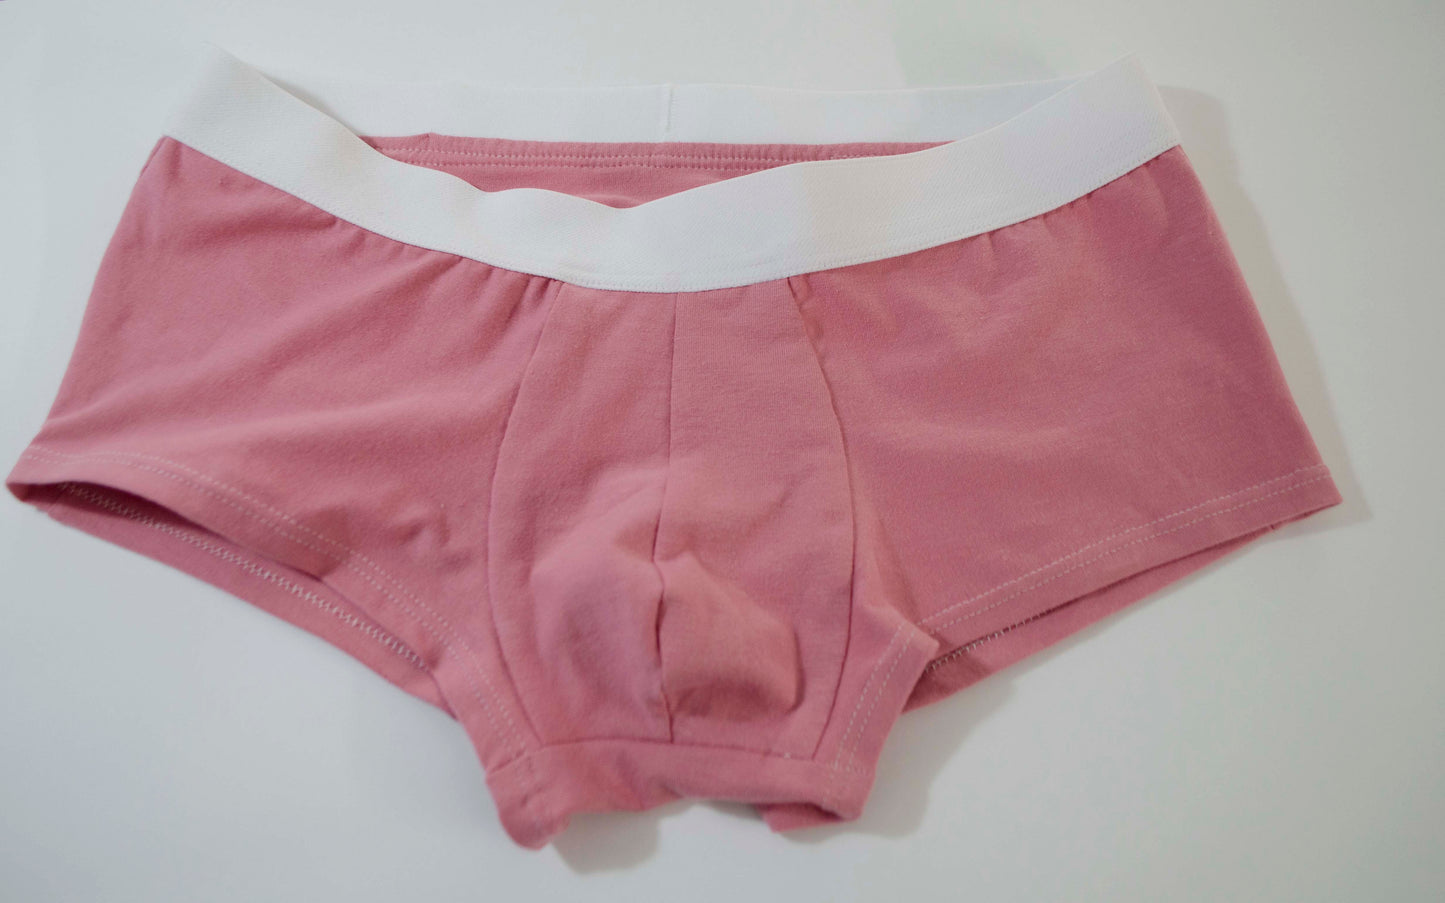 Cotton/Spandex Jersey in Dusty Pink